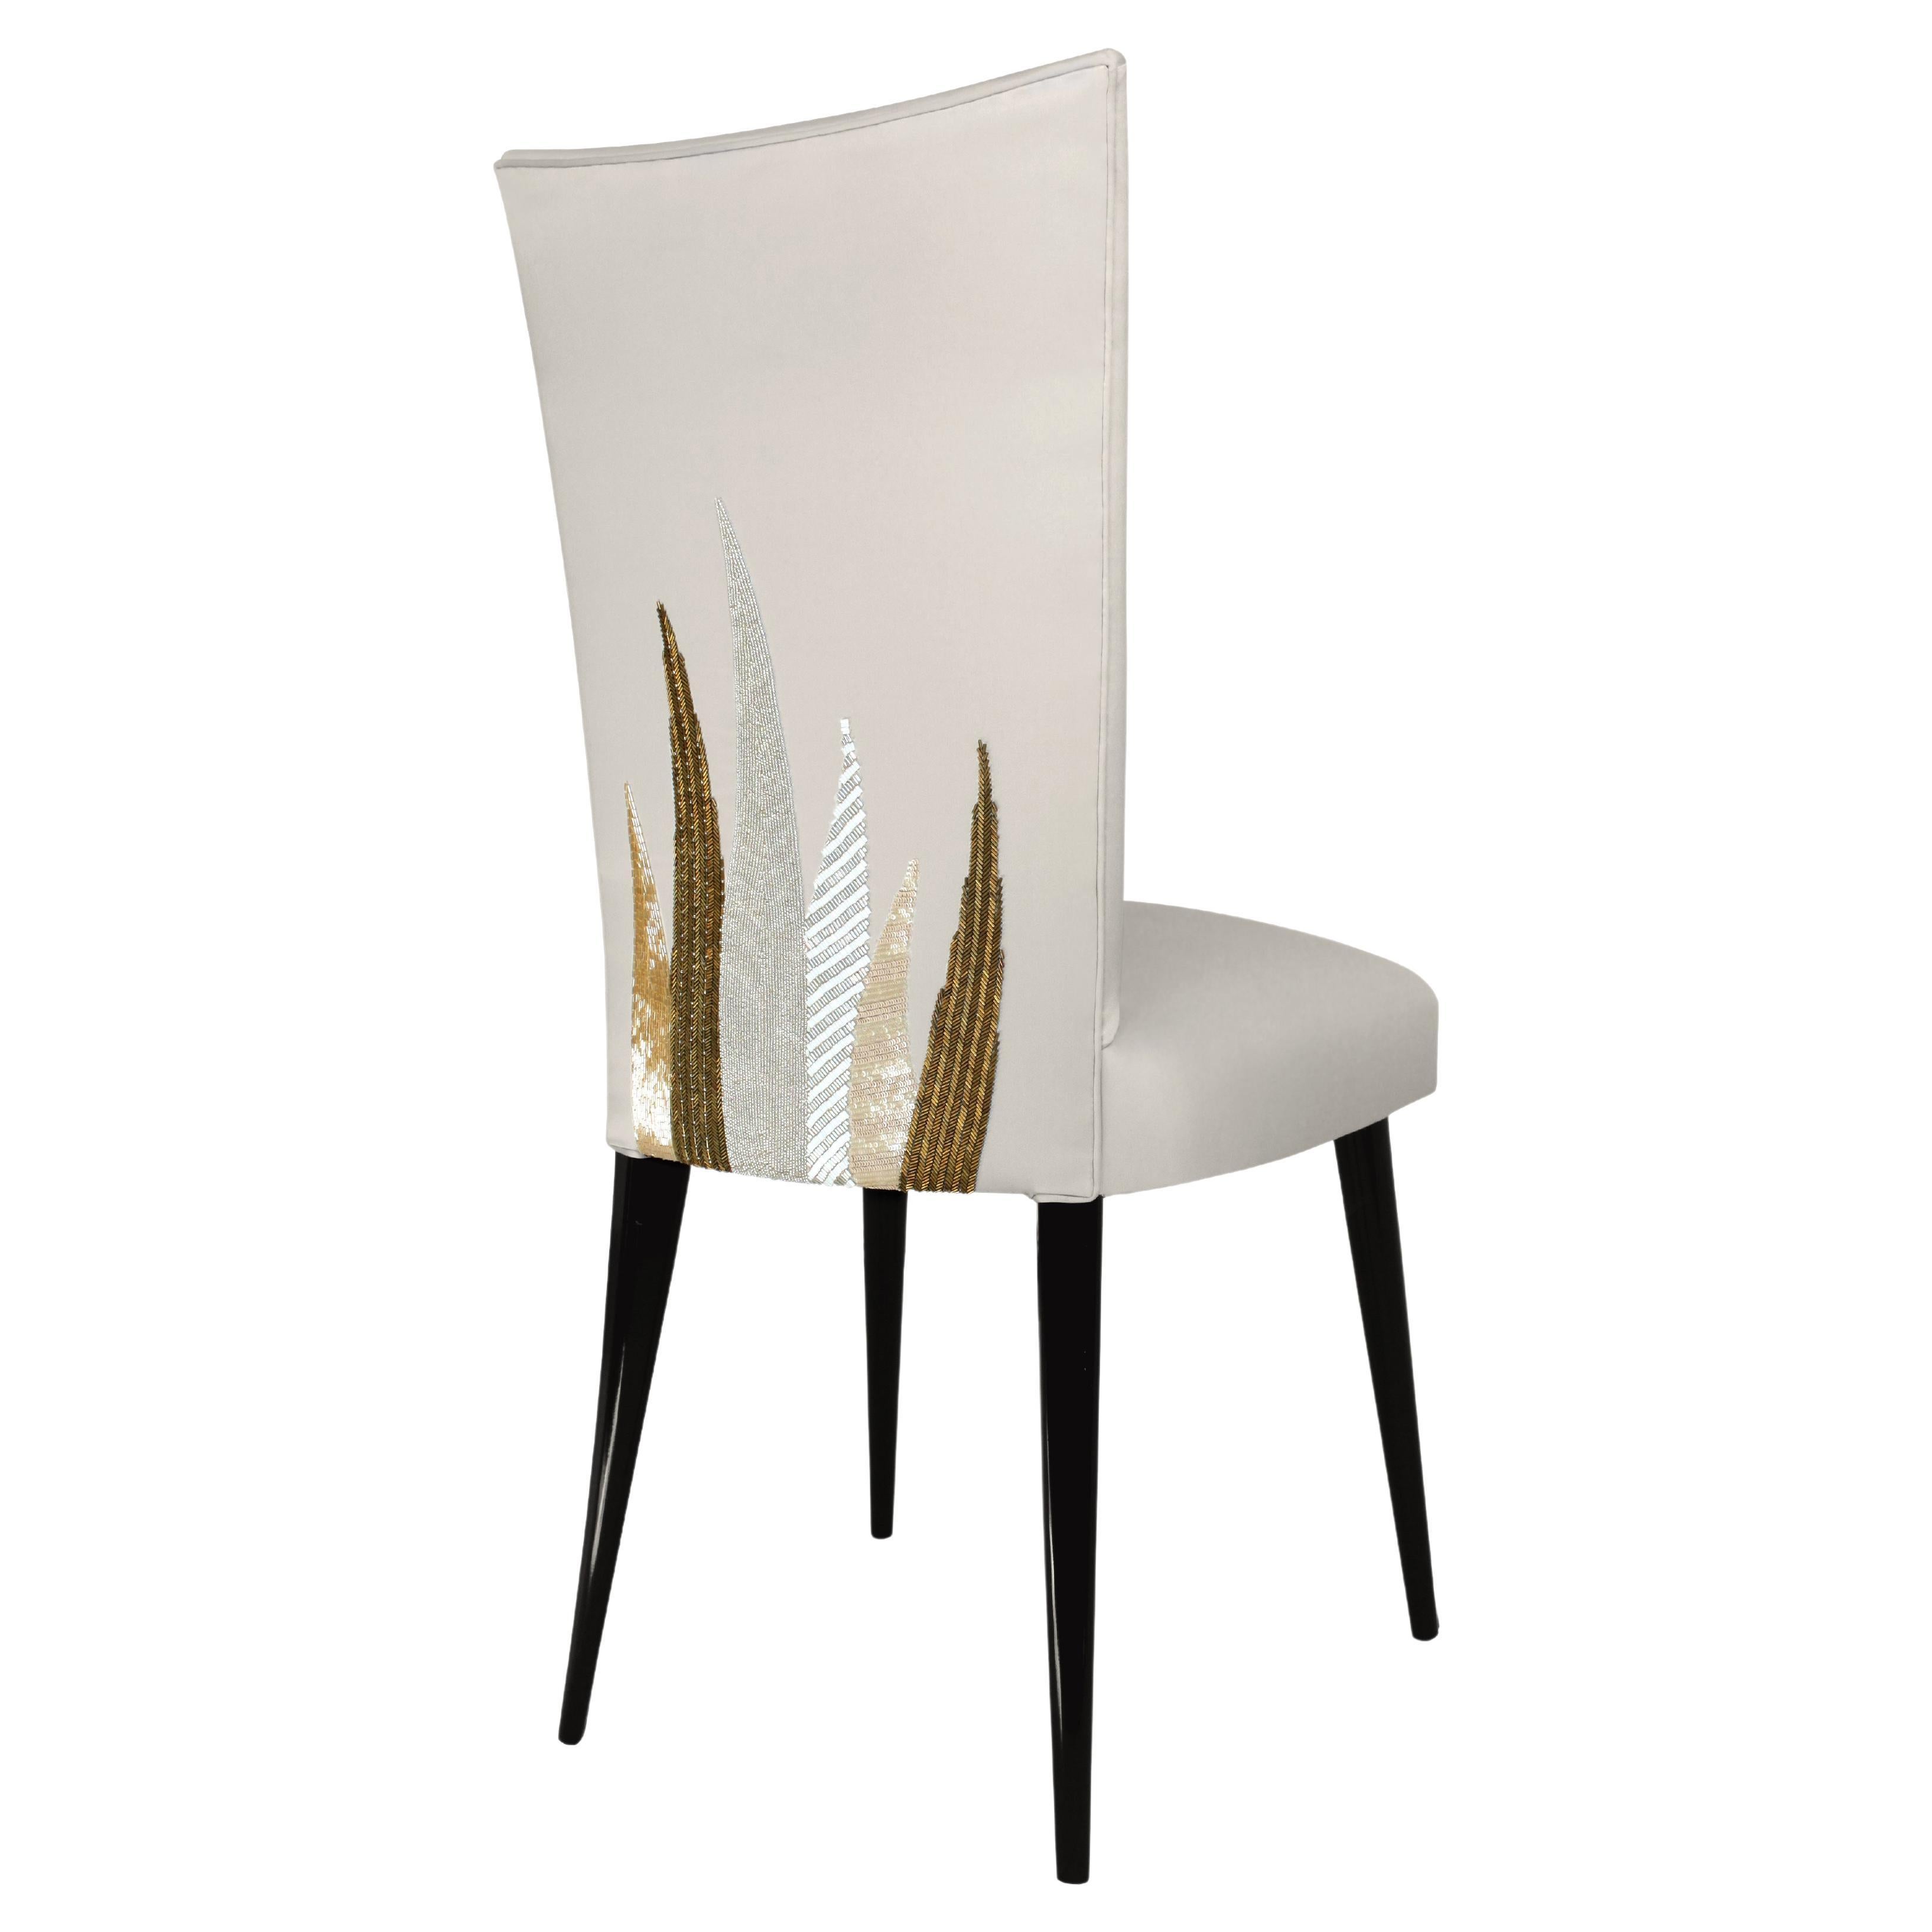 Aiveen Daly Agave Stiletto Chair 